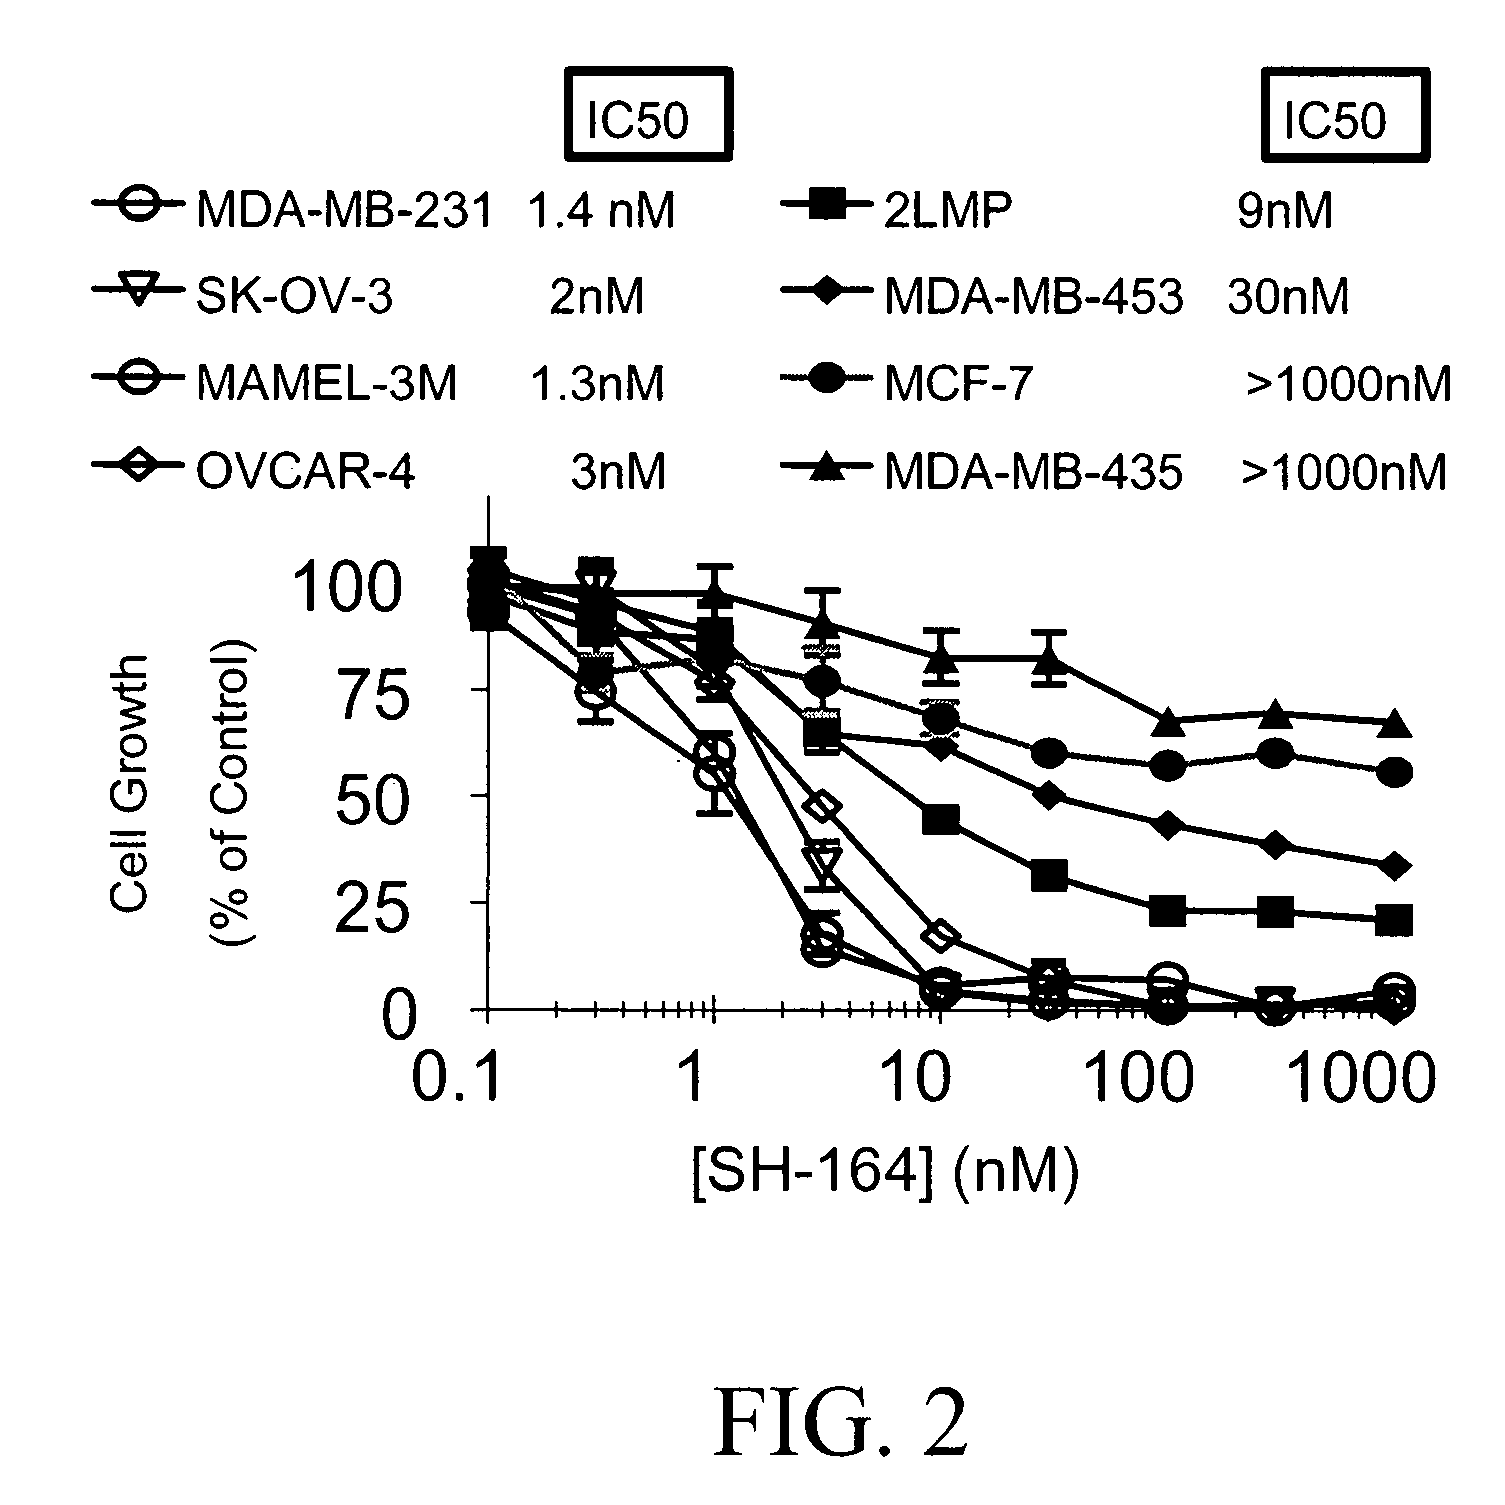 Bivalent Smac mimetics and the uses thereof